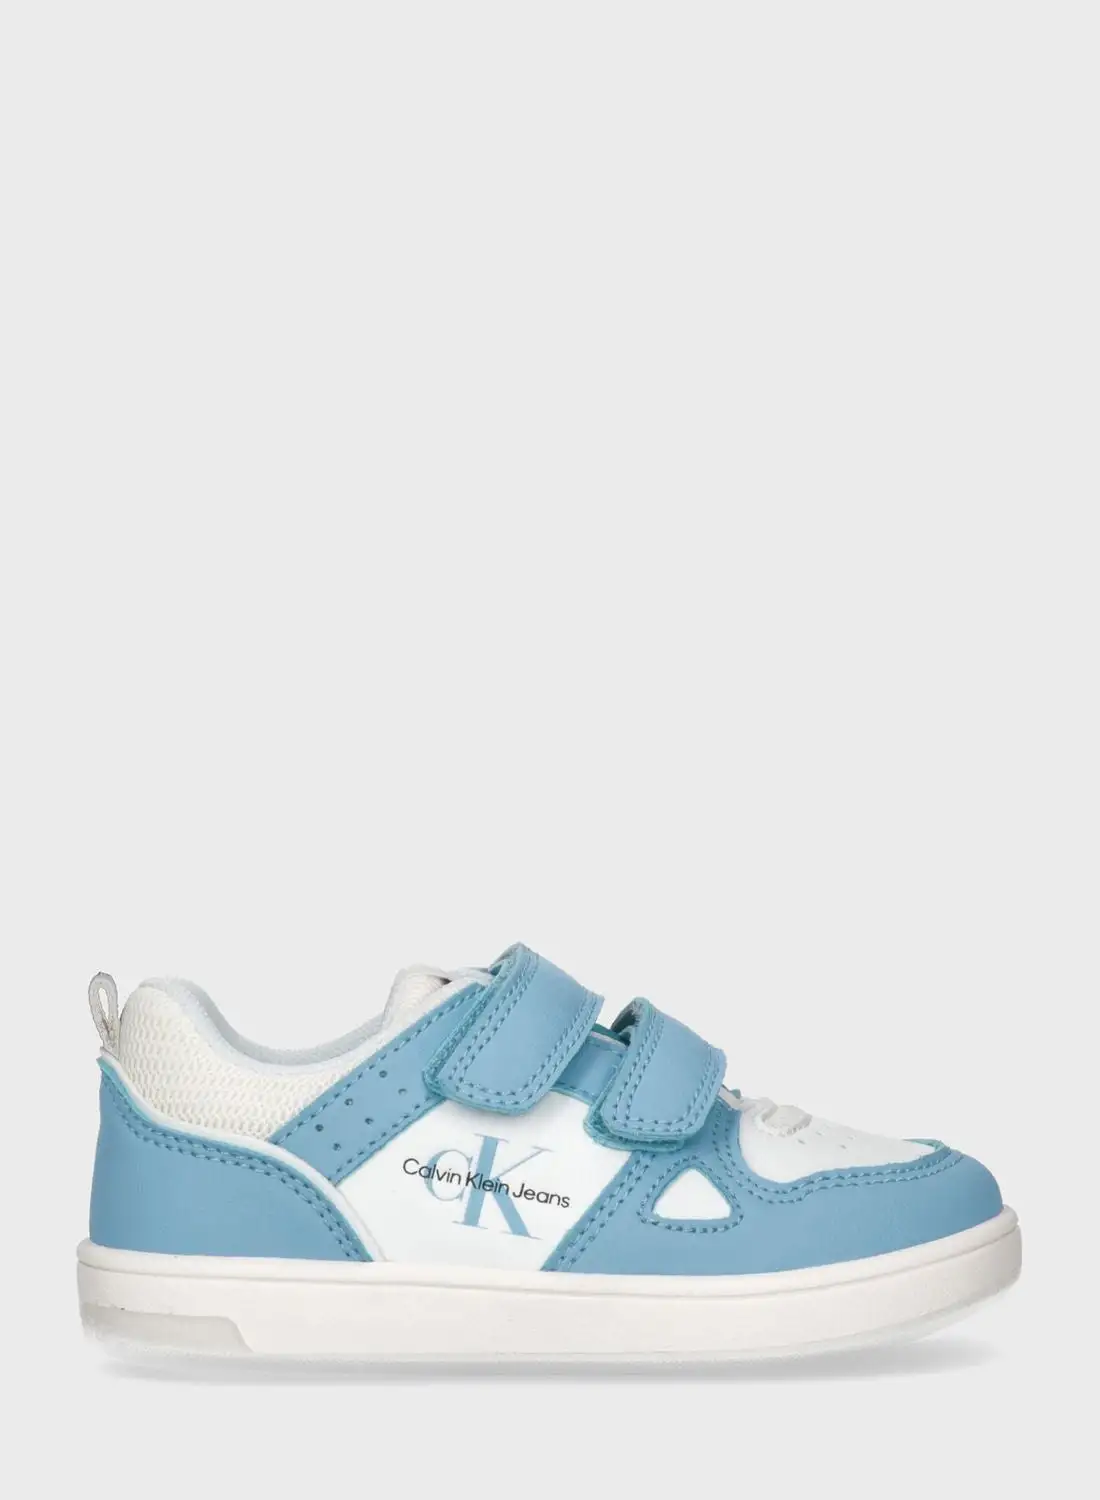 Calvin Klein Jeans Youth Velcro Sneakers